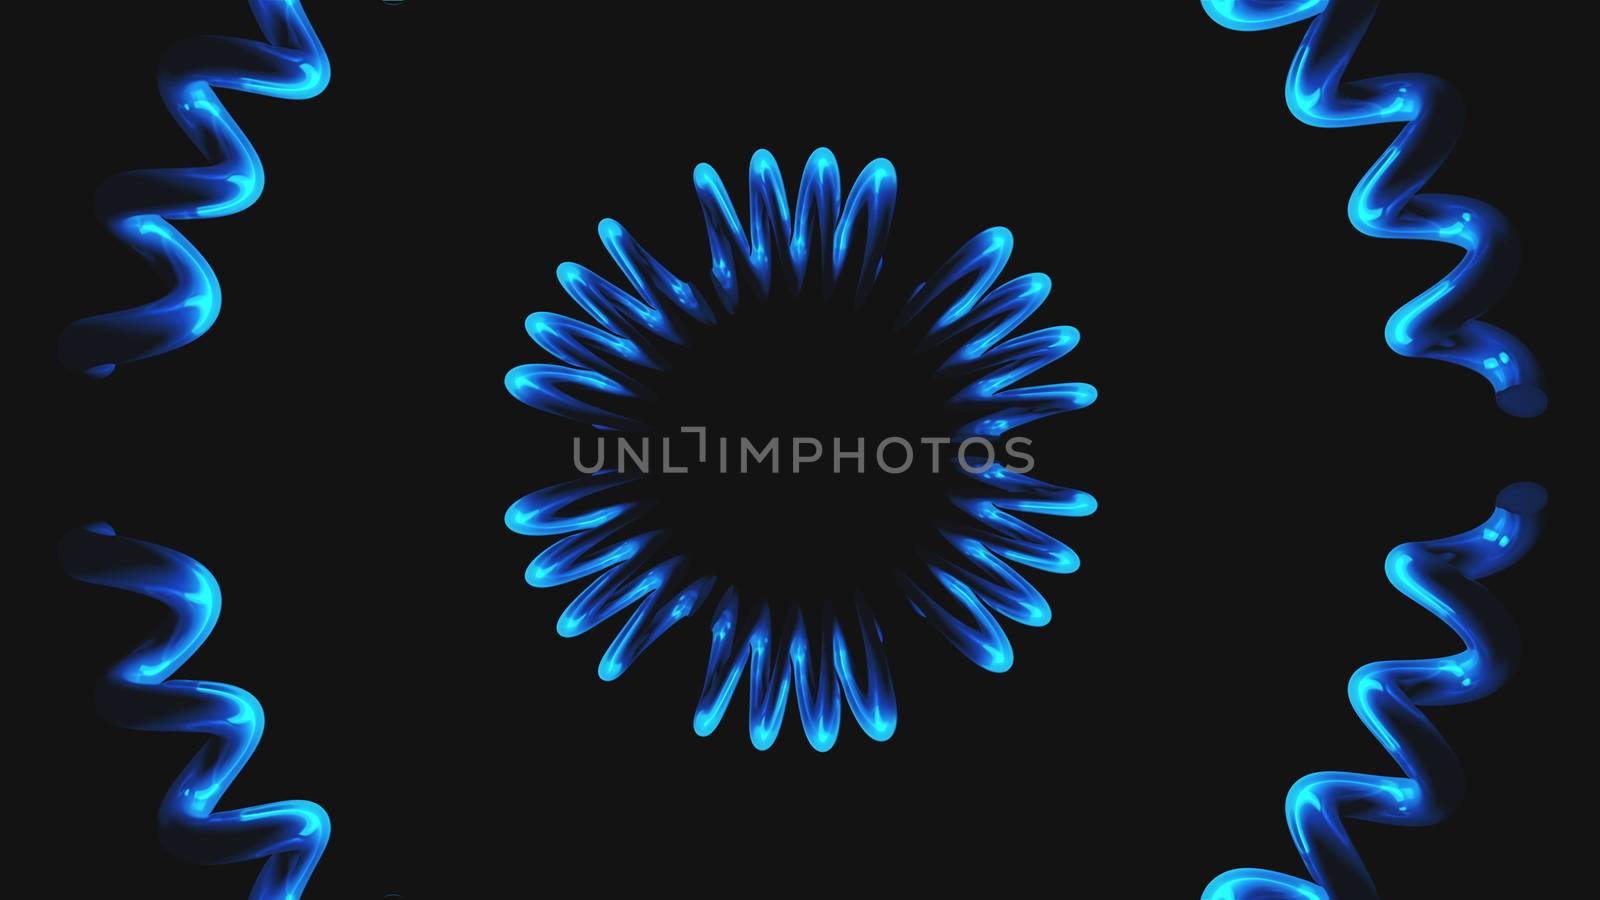 Simple 3d spiral shape is in space, 3d rendering computer generated background